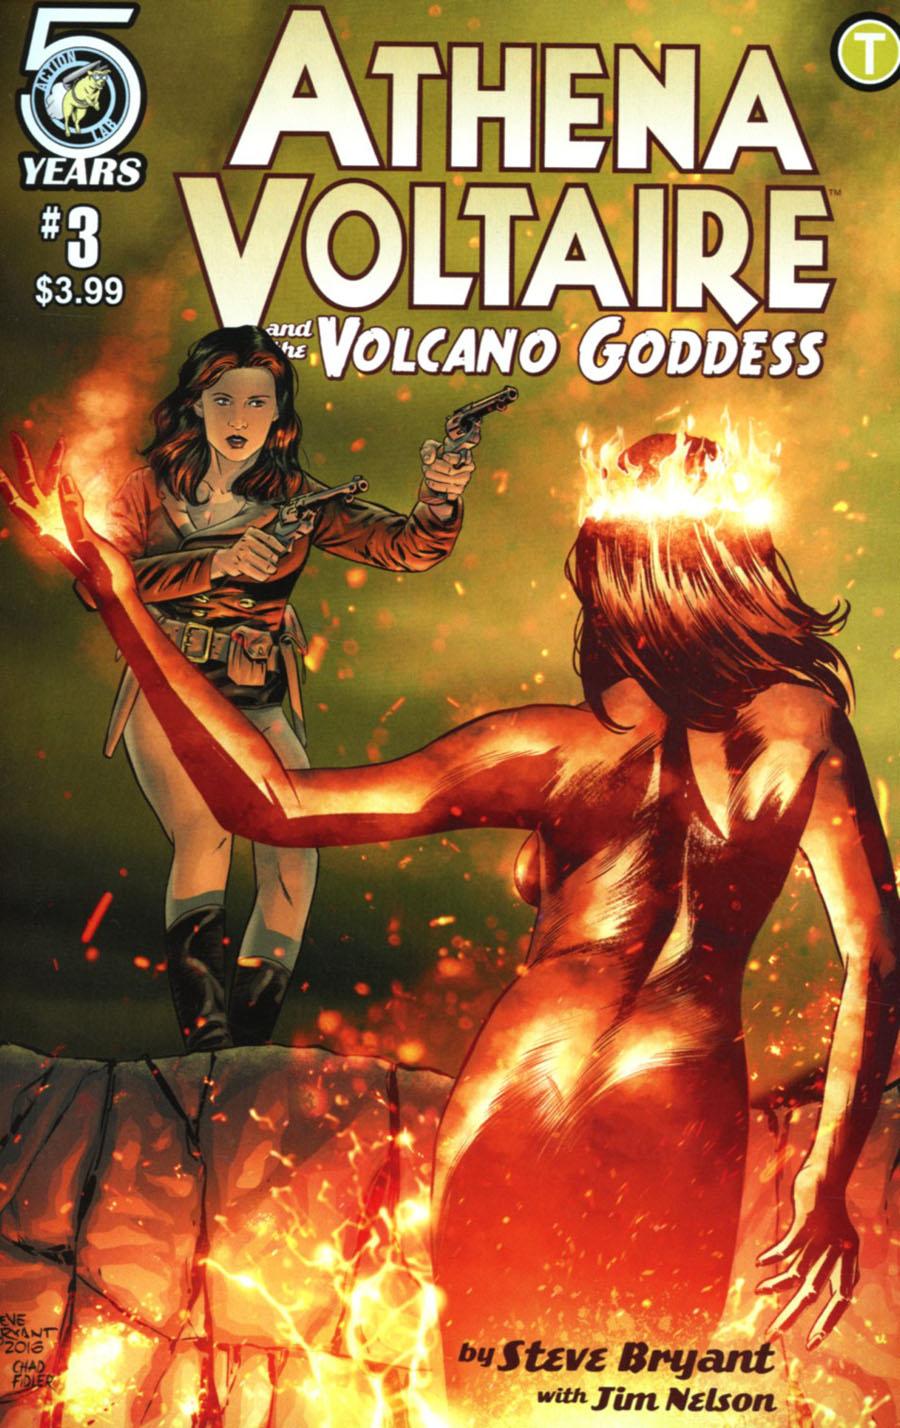 Athena Voltaire And The Volcano Goddess Vol. 1 #3